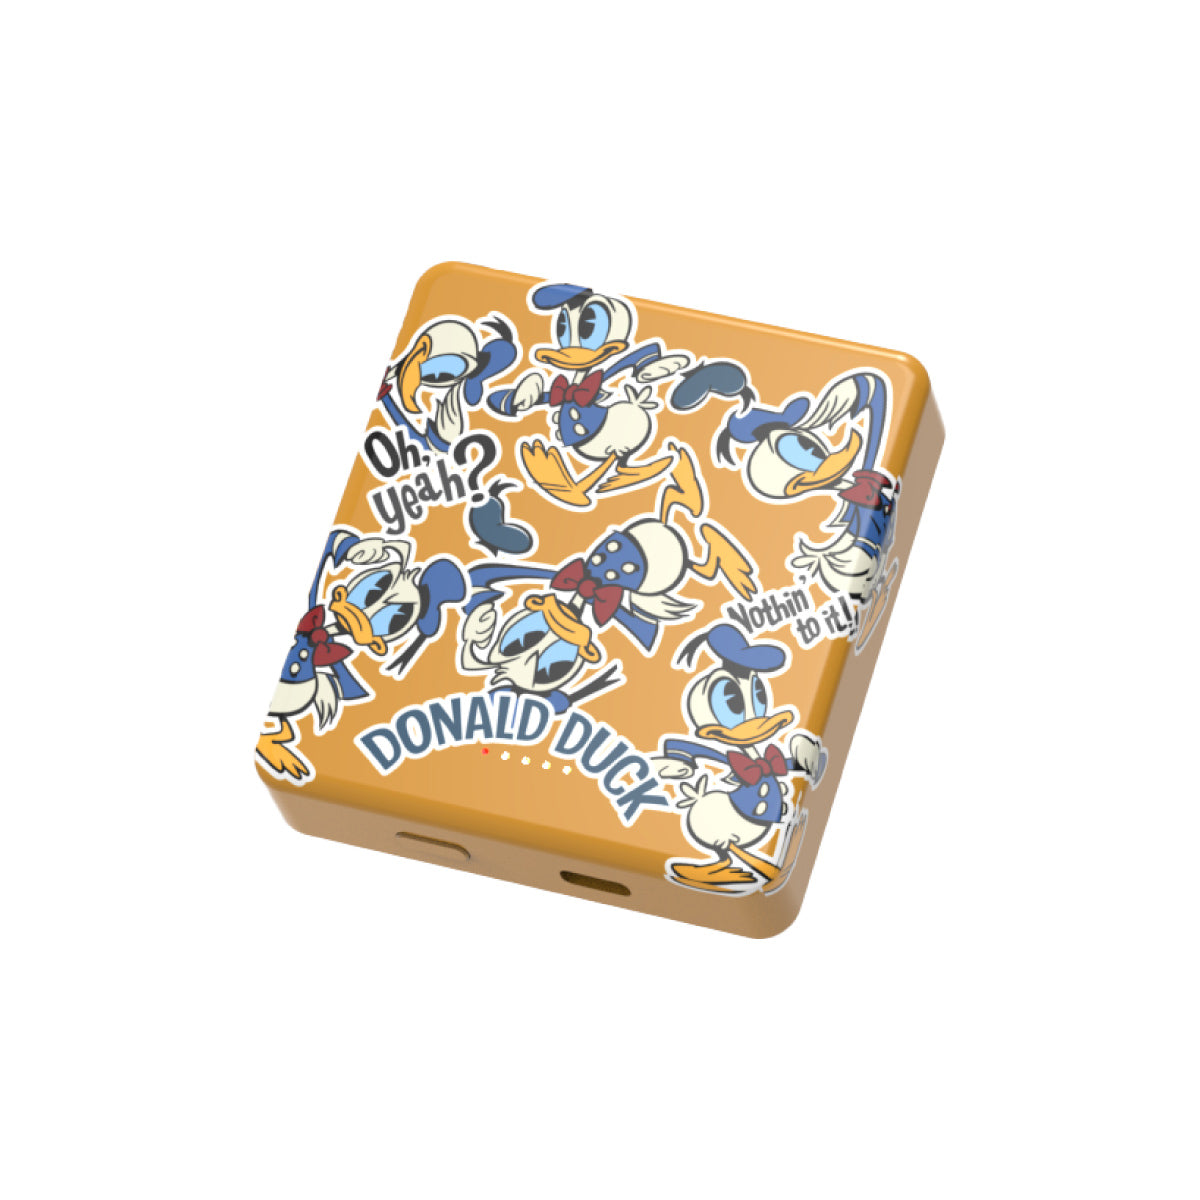 【LIMITED EDITION】Disney Magnetic Wireless Powerbank - Donald Duck